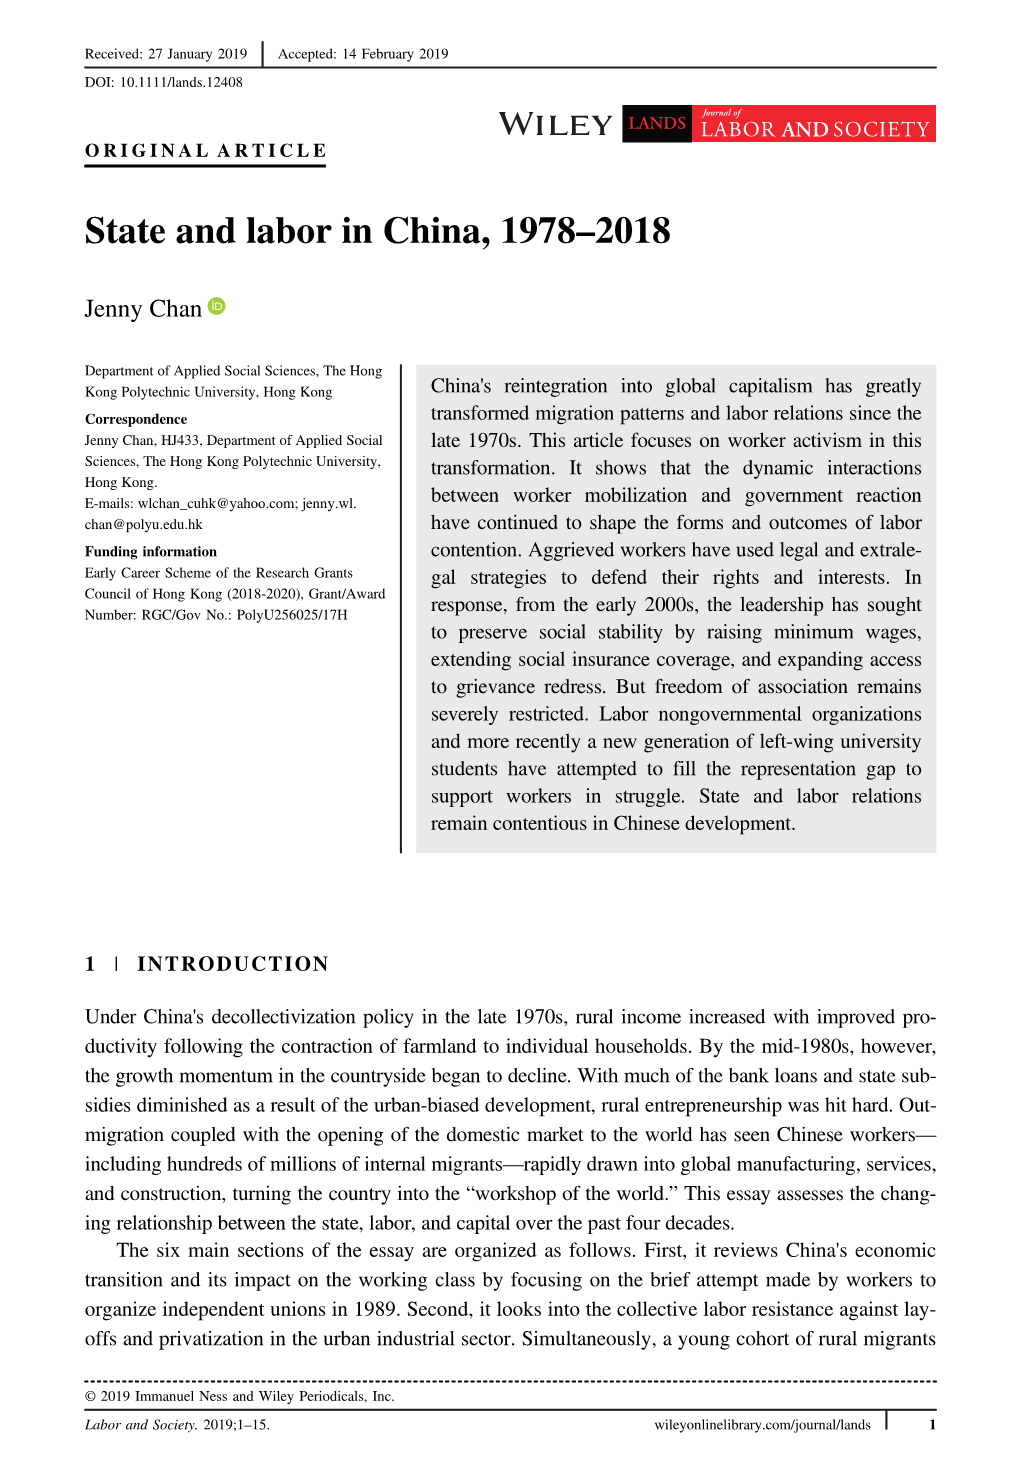 State and Labor in China, 1978-2018